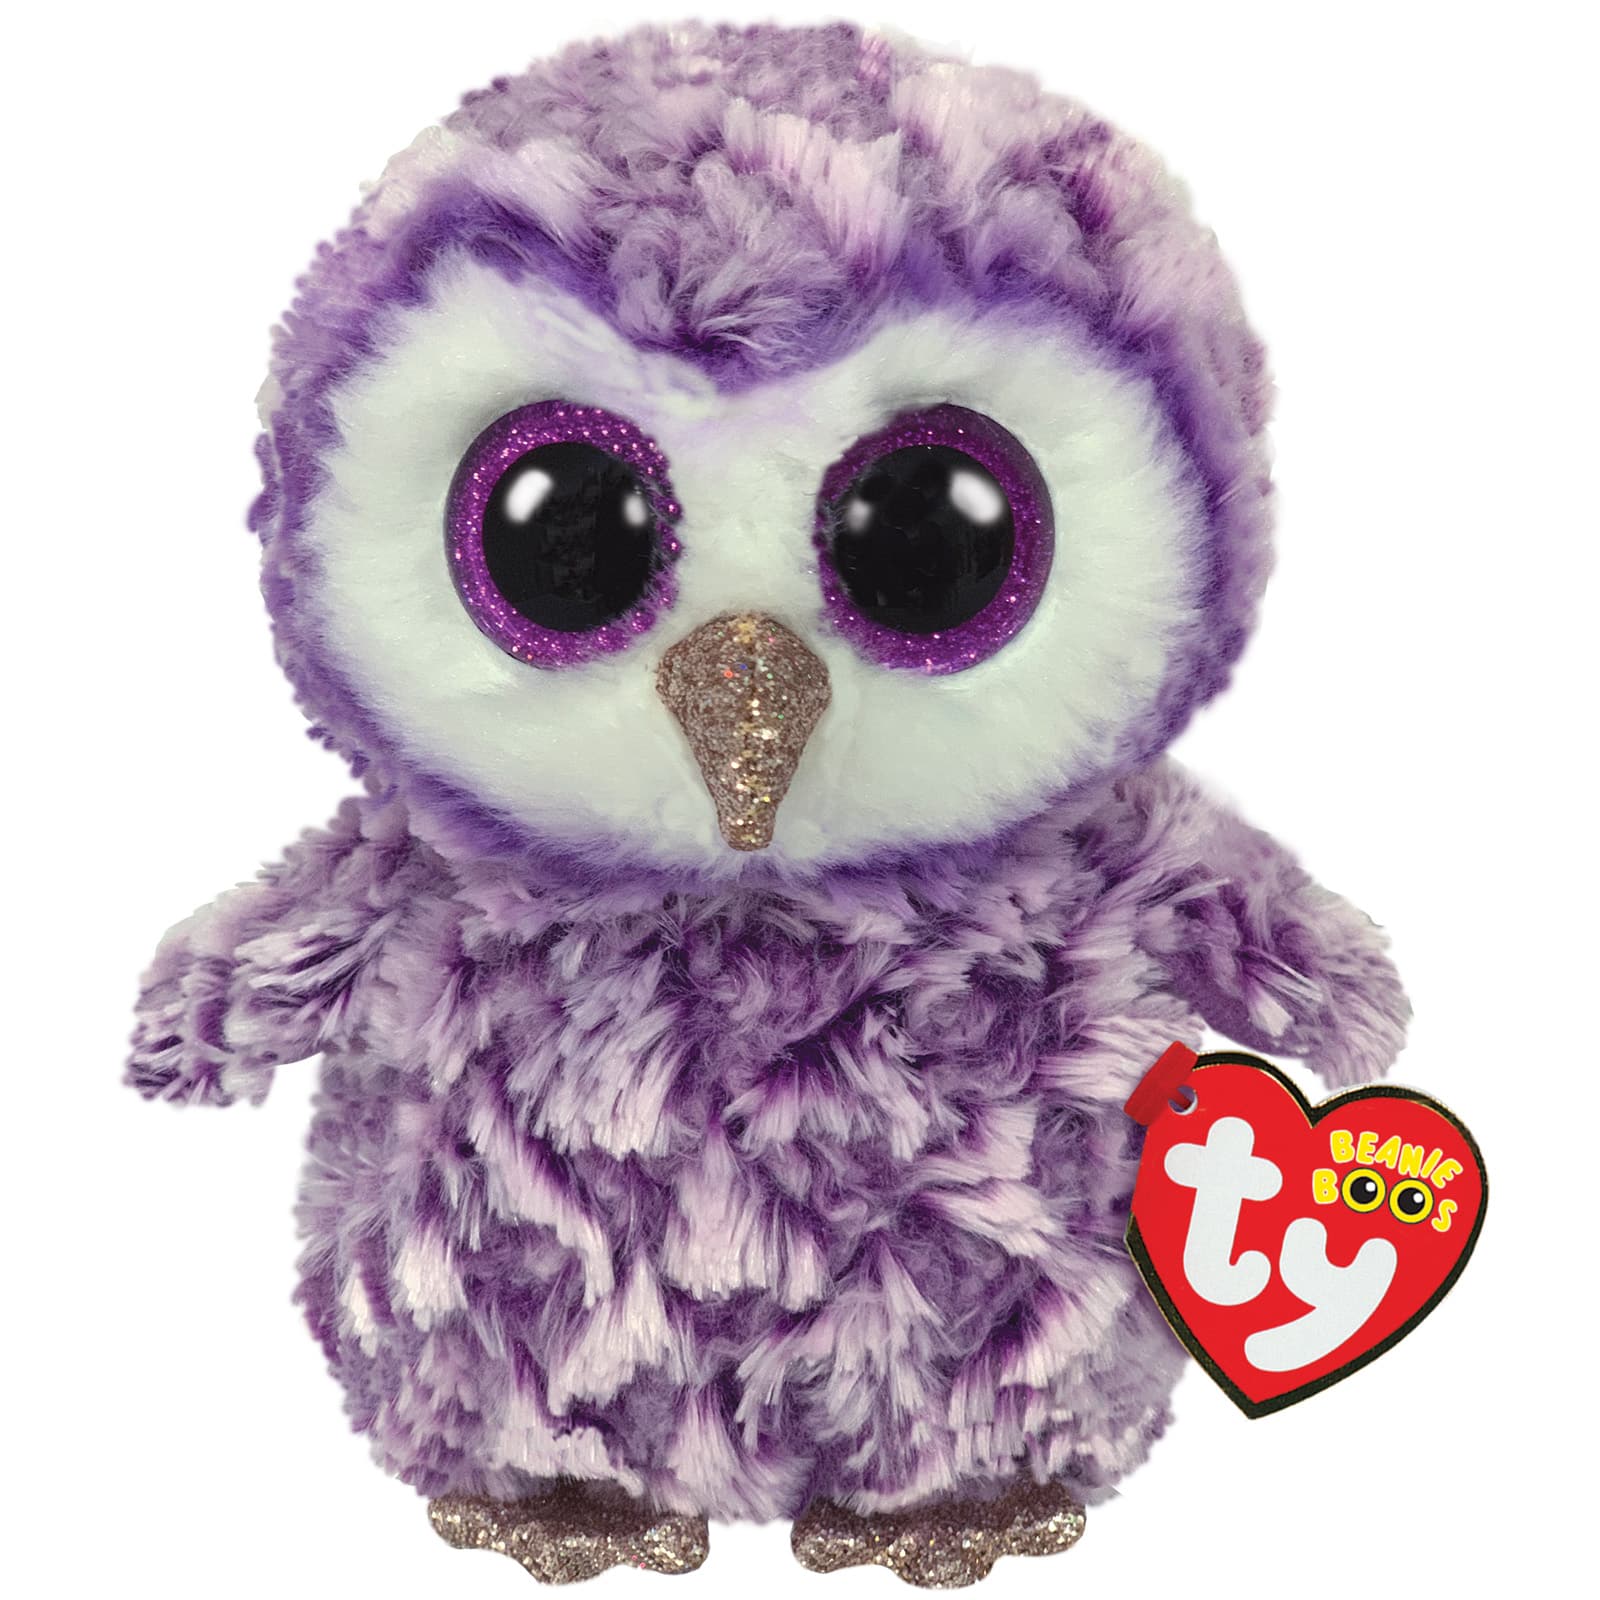 Ty Beanie Babies 36439 Flippables Medium Moonlight The Purple Owl Sequin for sale online 